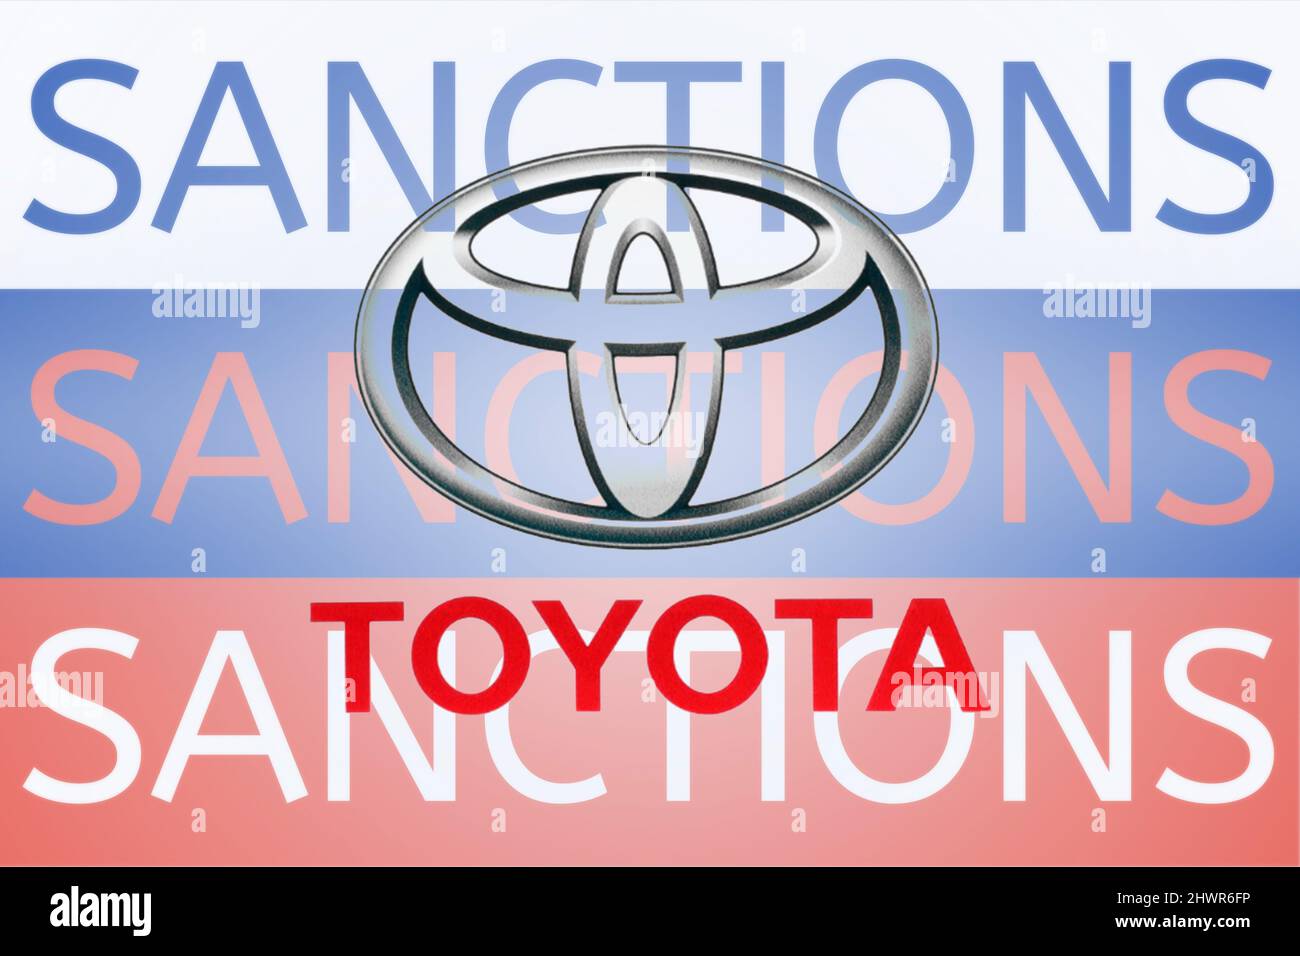 Toyota logo in front of the sanction text on the Russian flag. Fresh sanctions against Russia over its invasion of Ukraine. March 2022, San Francisco, USA Stock Photo